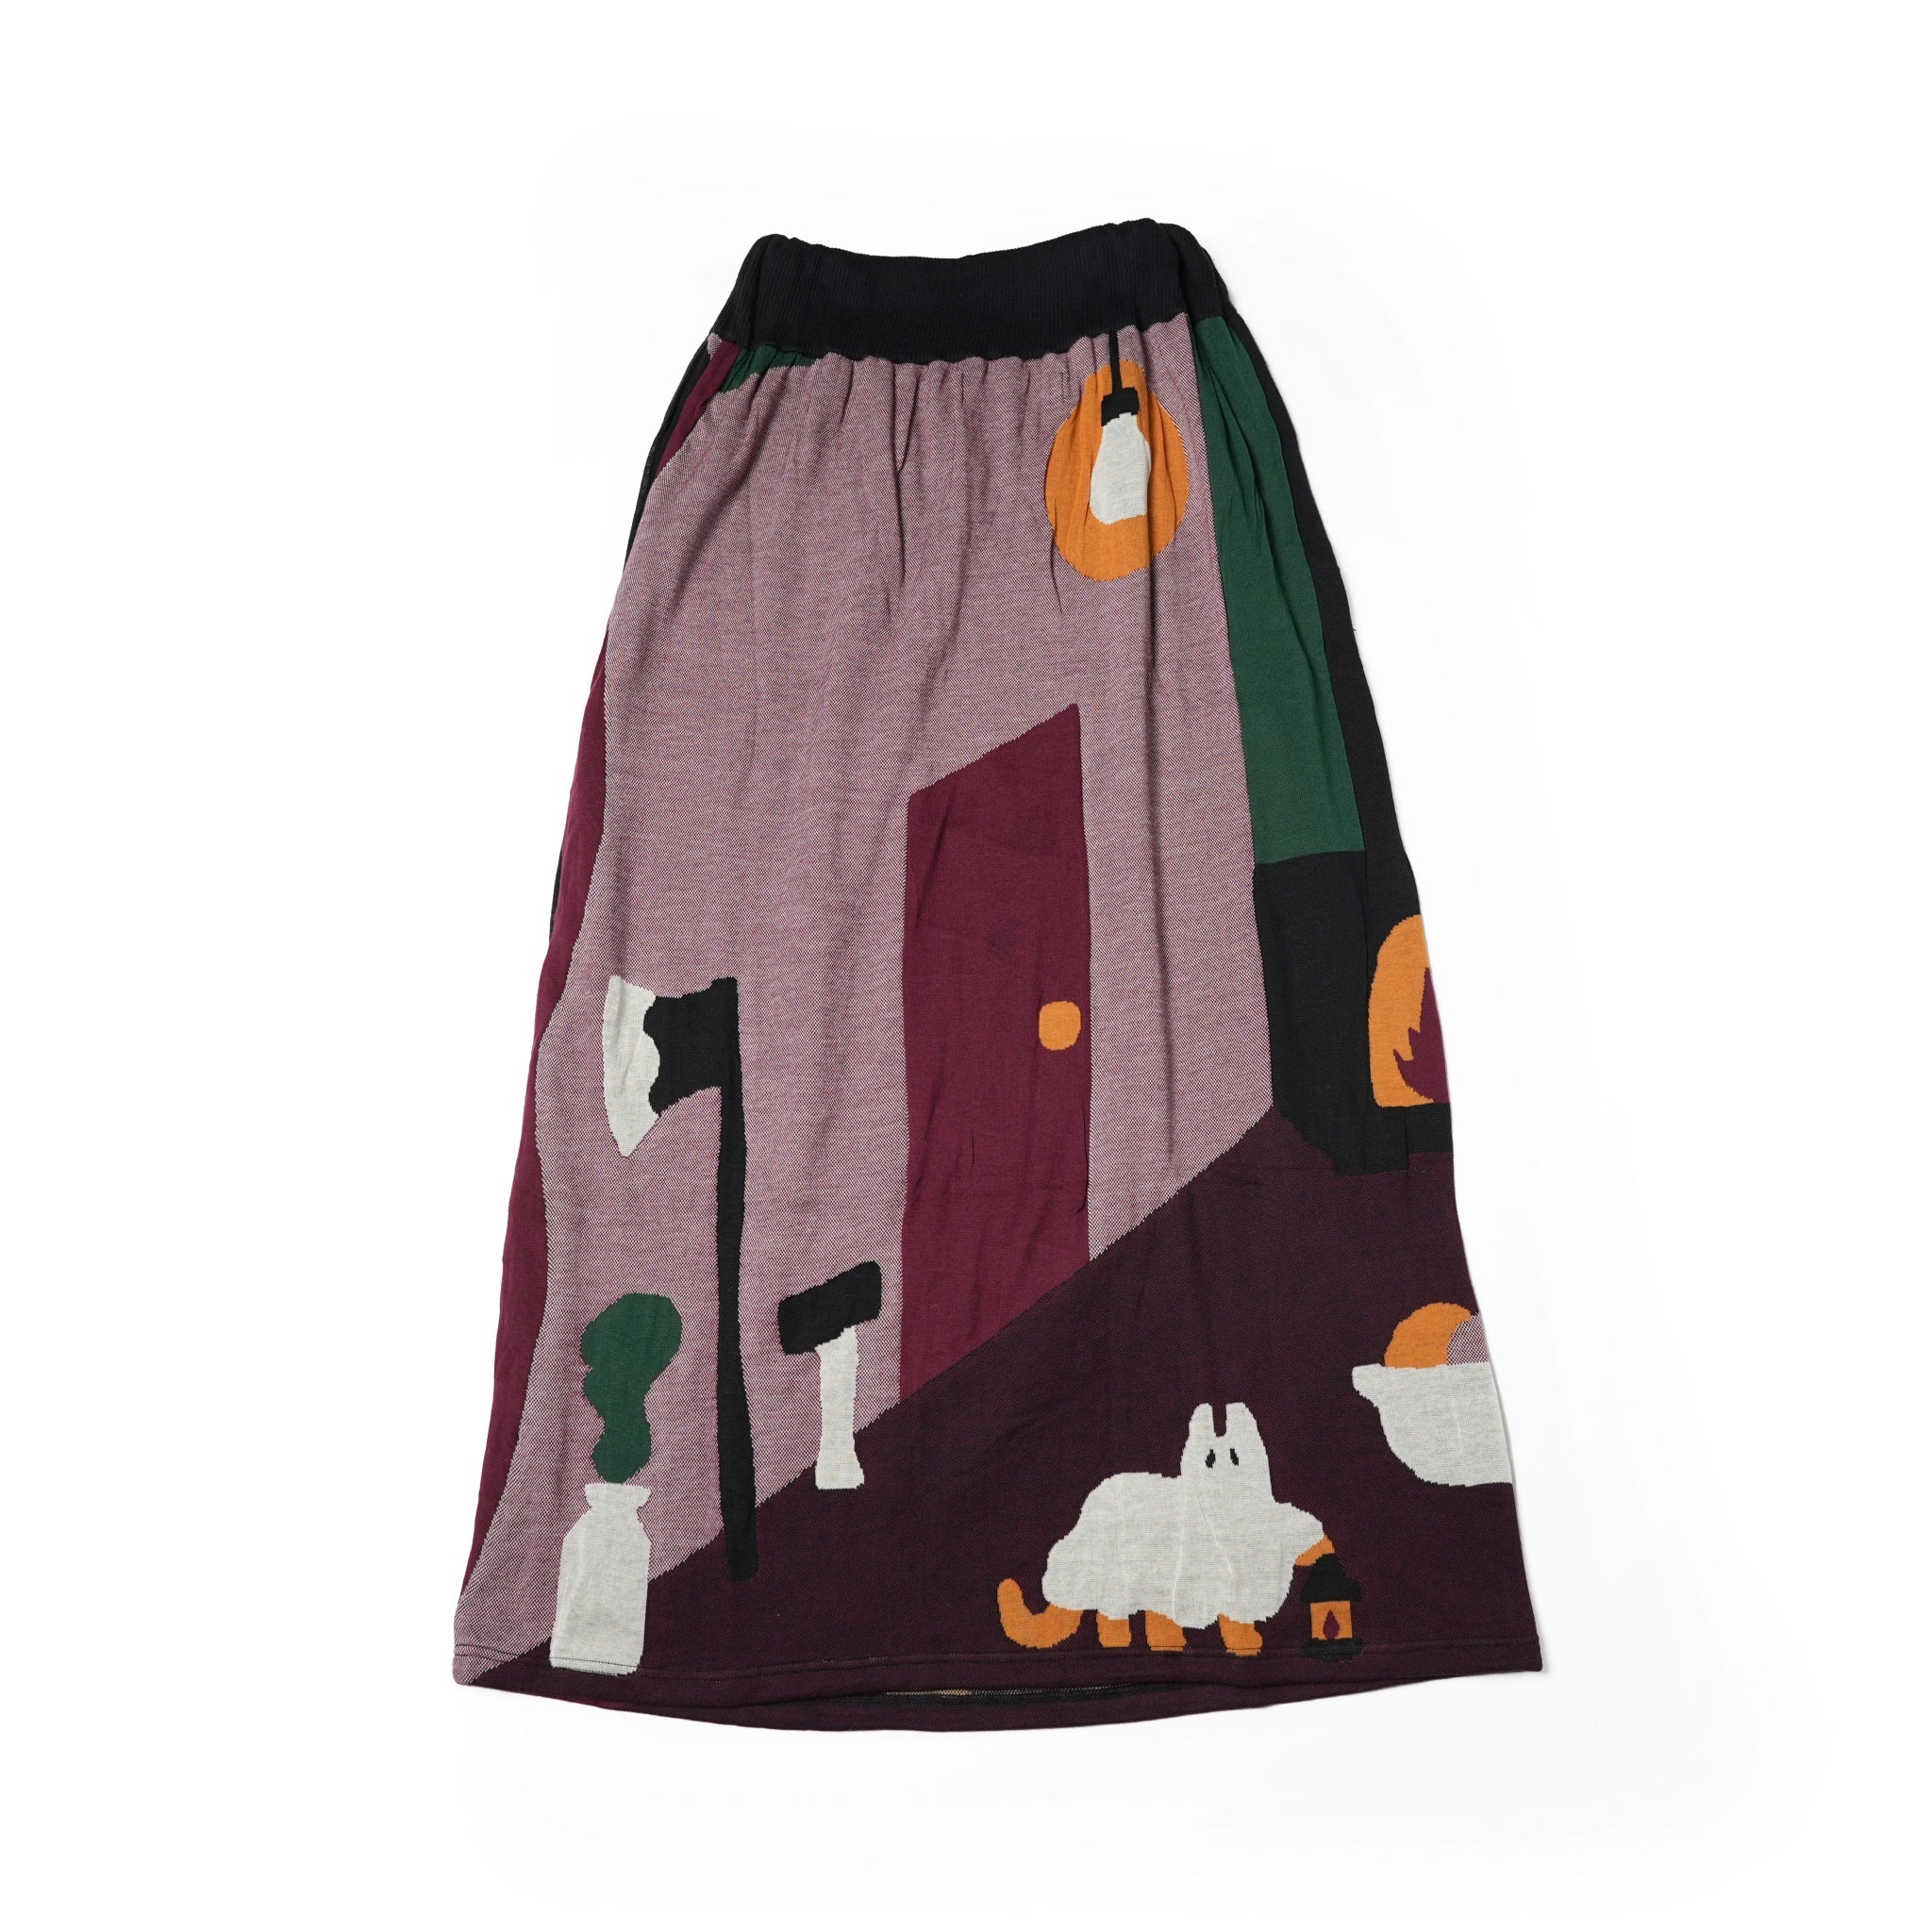 No:bsd23AW-24a | Name:In The Room Skirt | Color:Forest【BEDSIDEDRAMA_ベッドサイドドラマ】